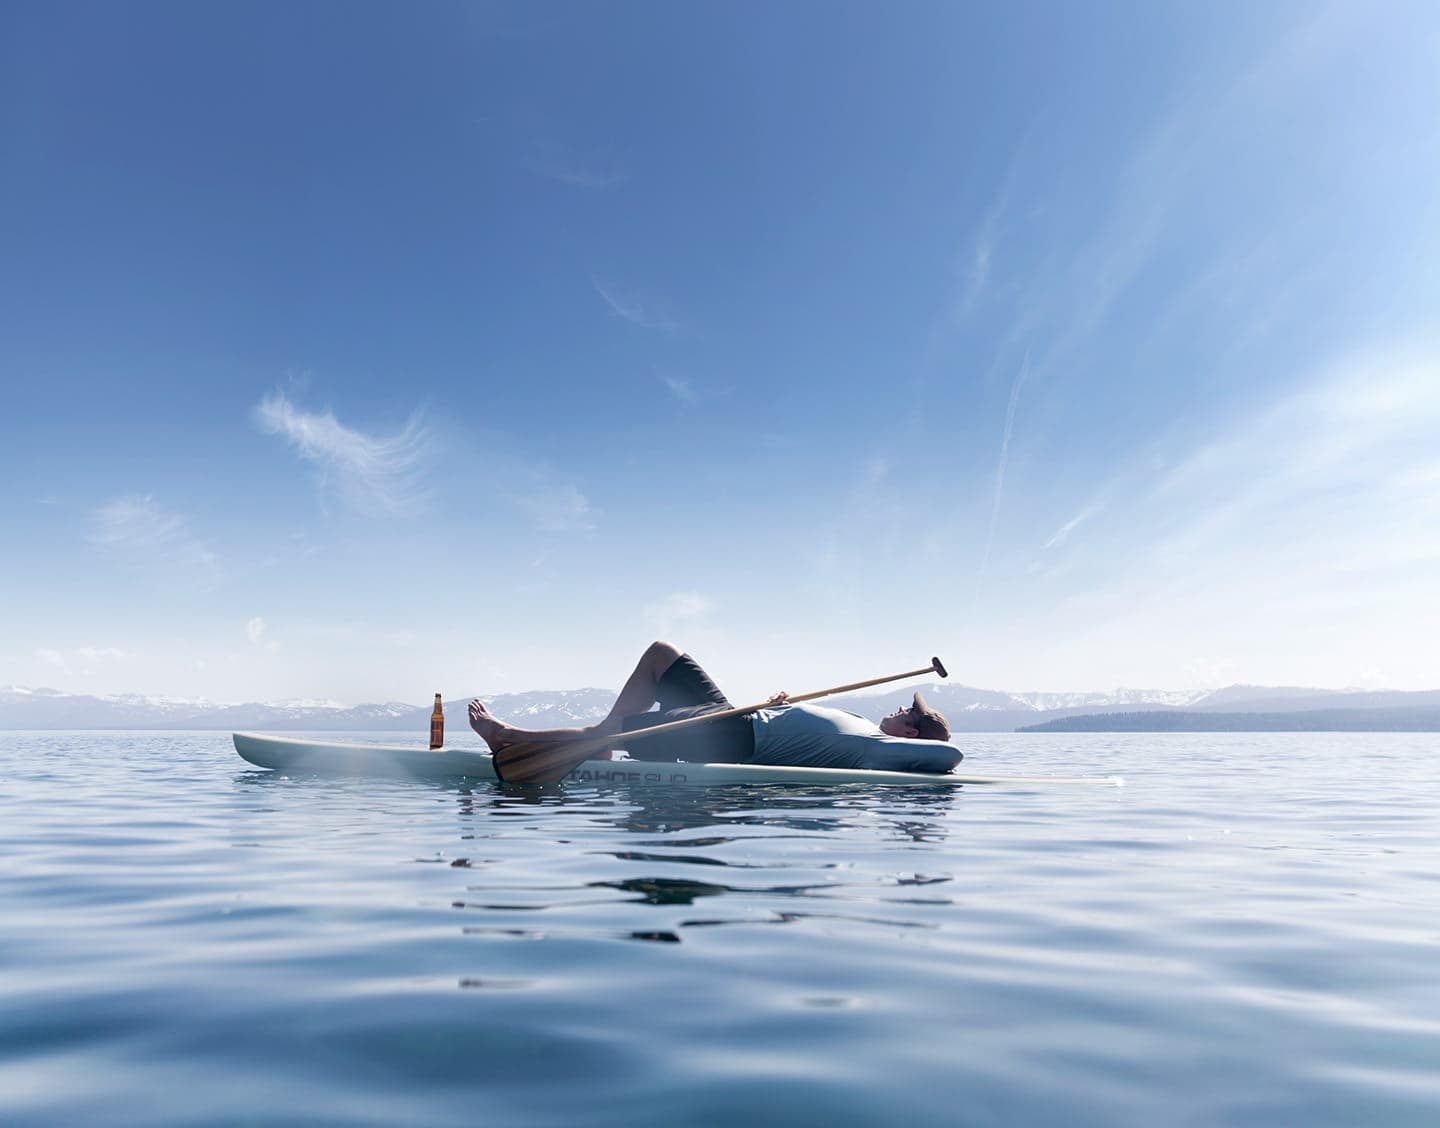 Man-laying-on-paddle-board-on-Tahoe-lake-with-mountains-Rod-McLean_G